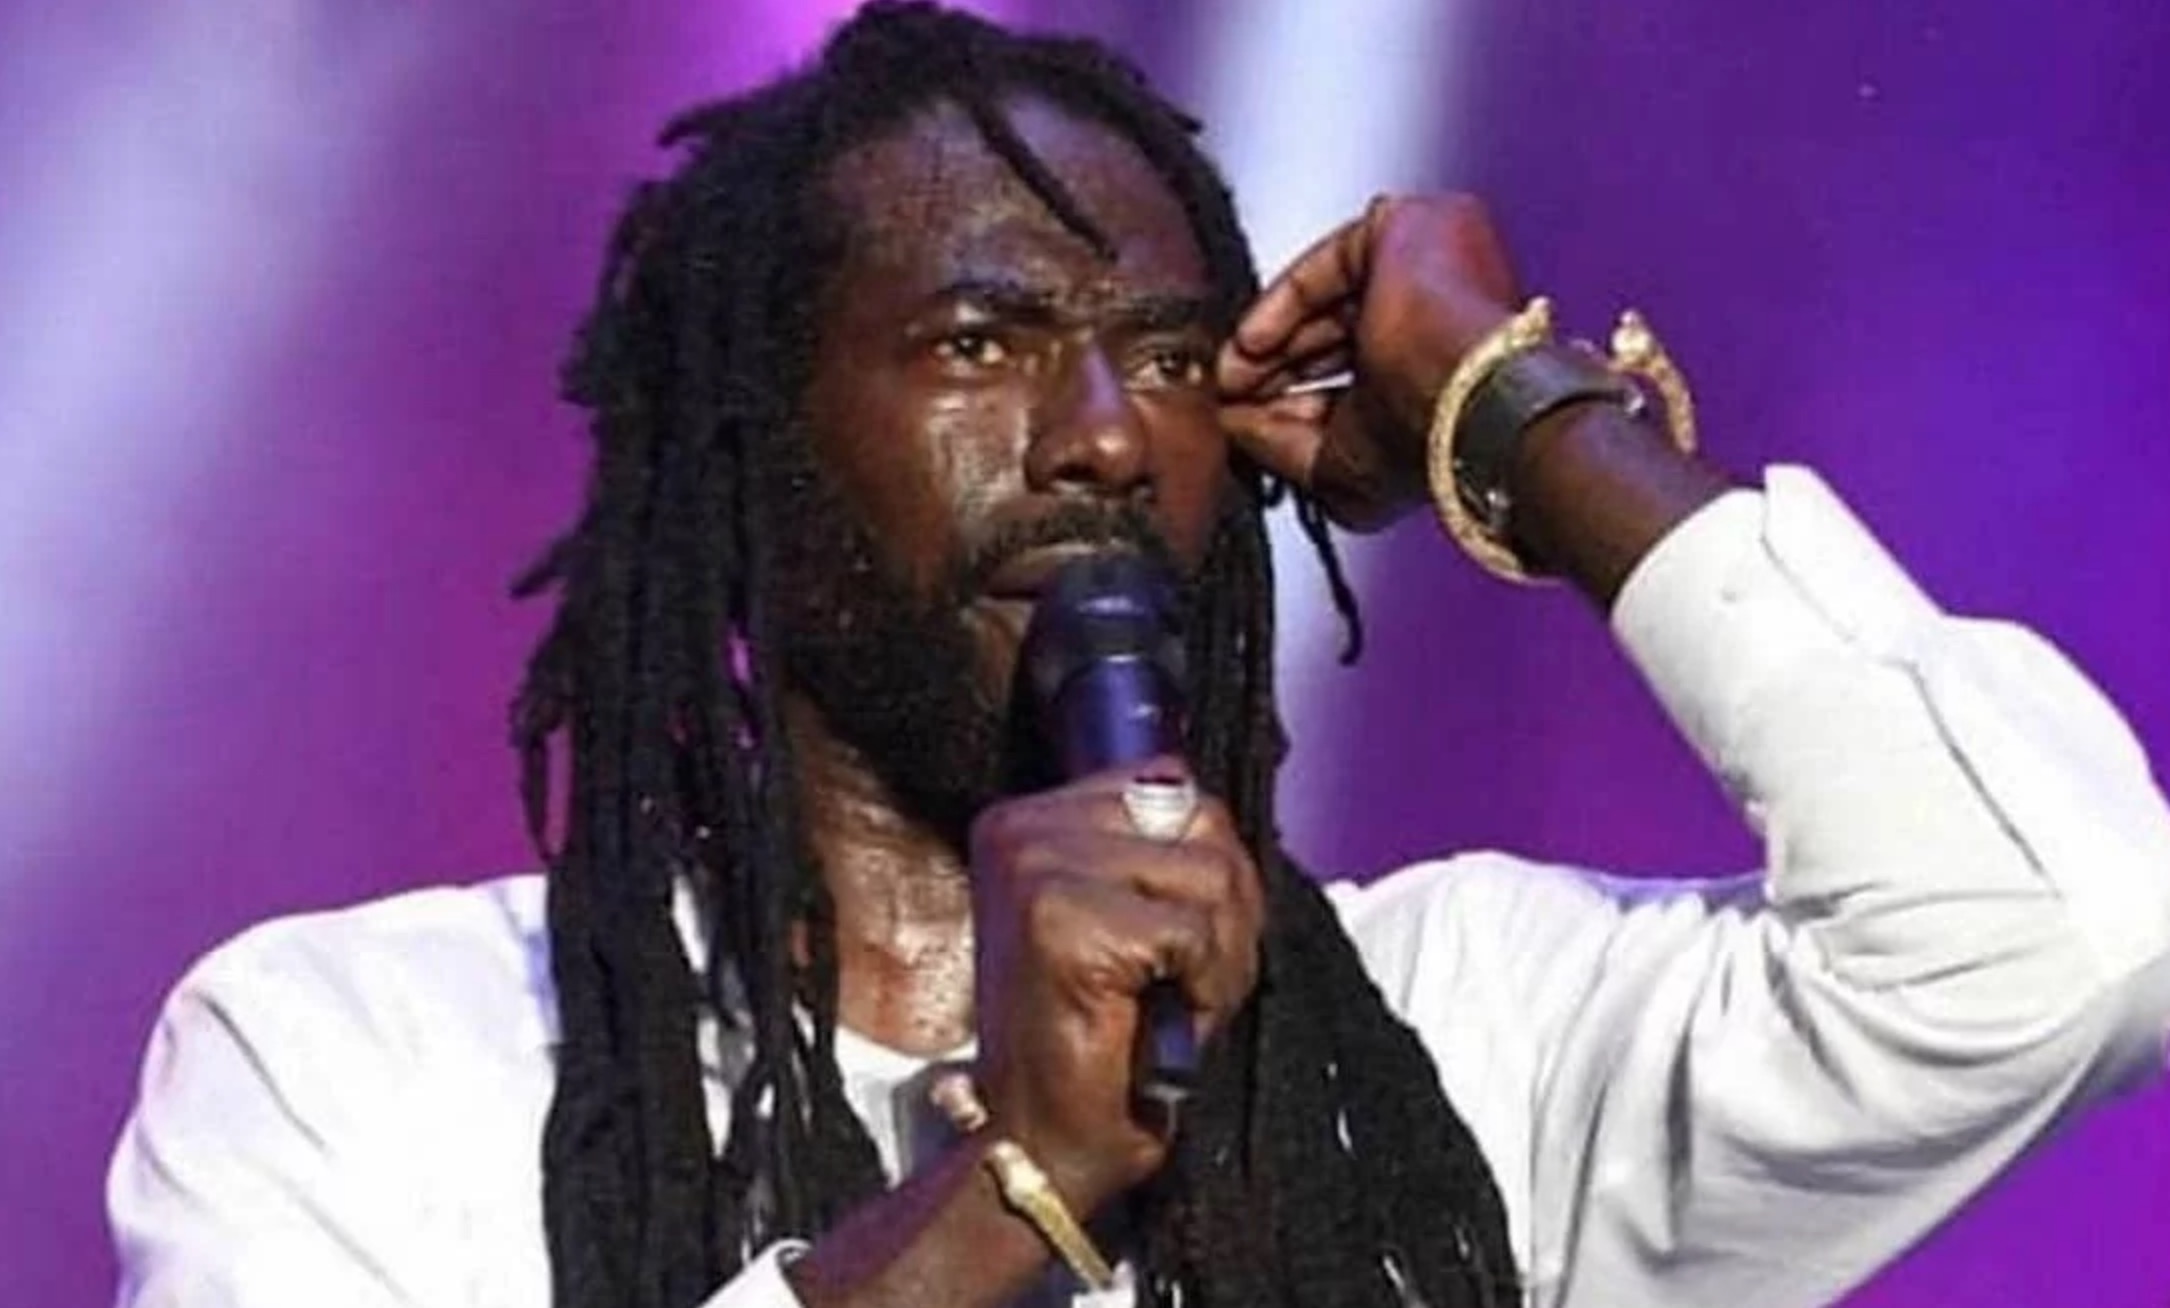 Buju Banton Lashes Out at Jamaica's Government in Latest Performance